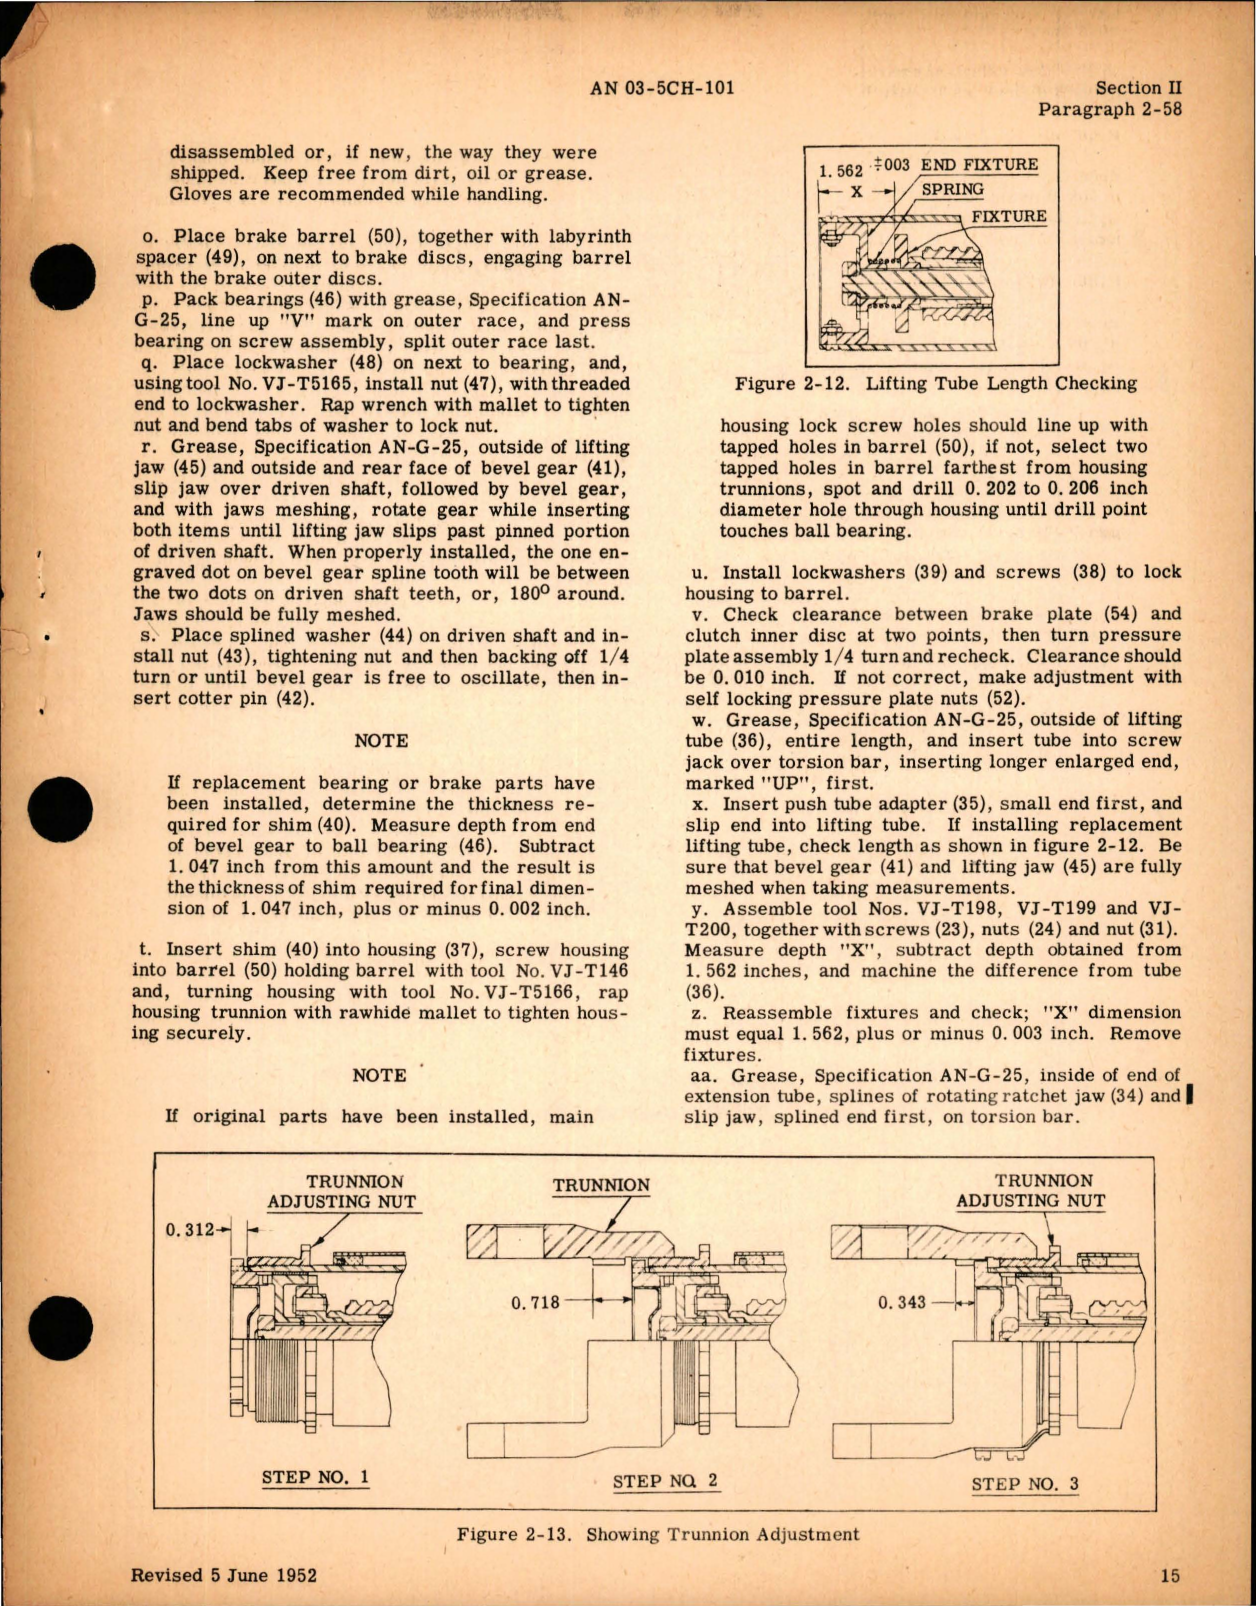 Sample page 5 from AirCorps Library document: Overhaul Instructions for Main Landing Gear Actuator - Part VJ-550